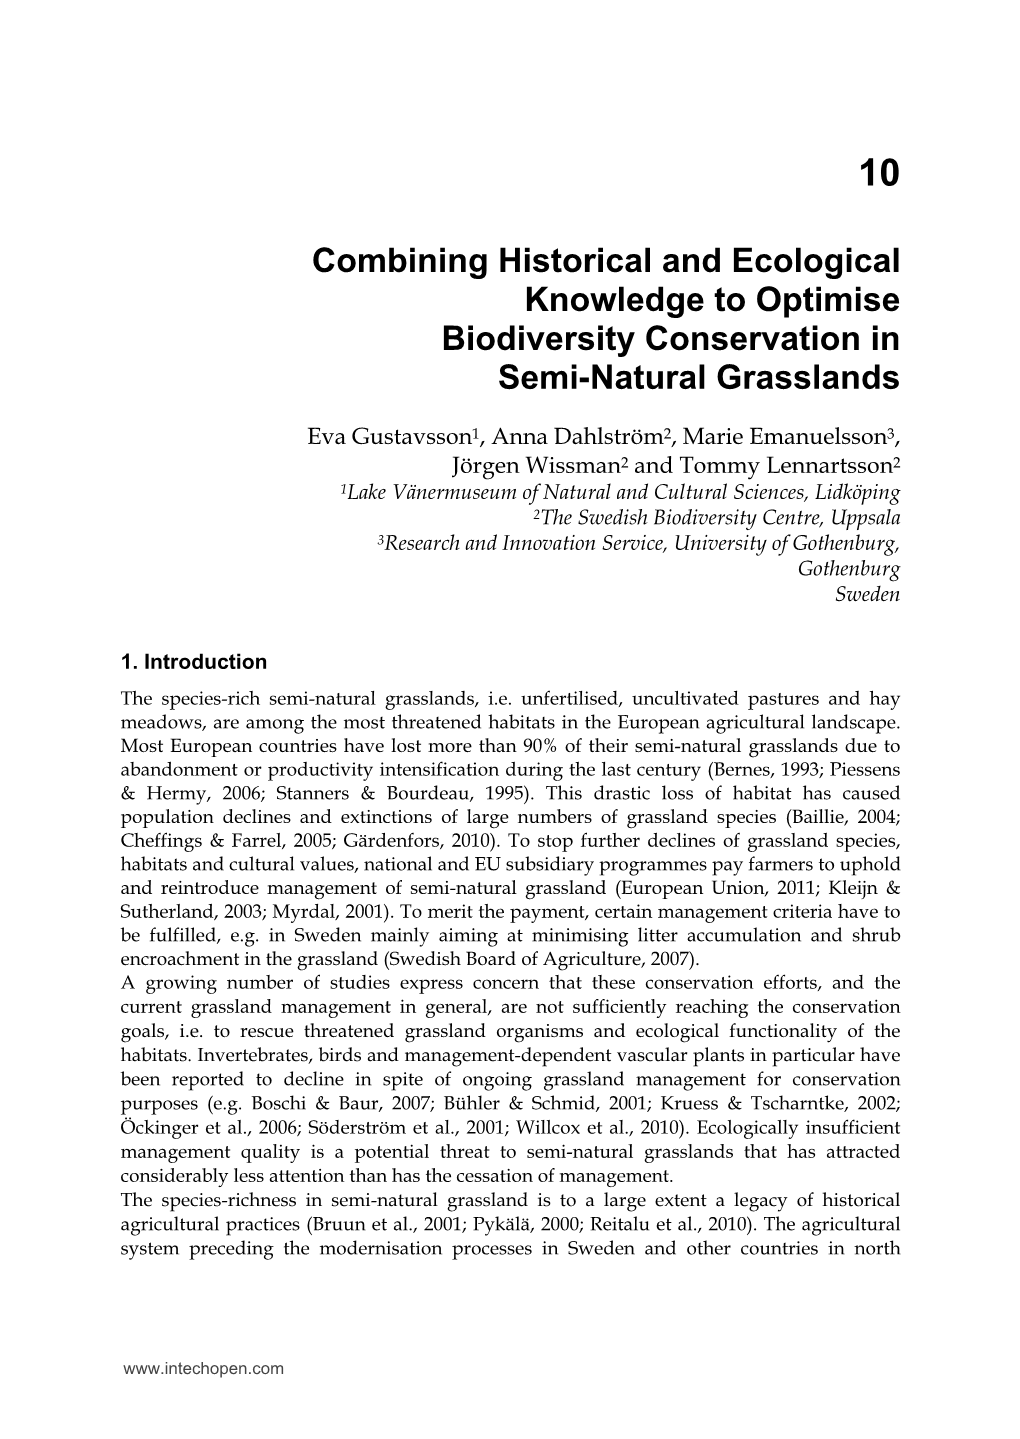 Combining Historical and Ecological Knowledge to Optimise Biodiversity Conservation in Semi-Natural Grasslands